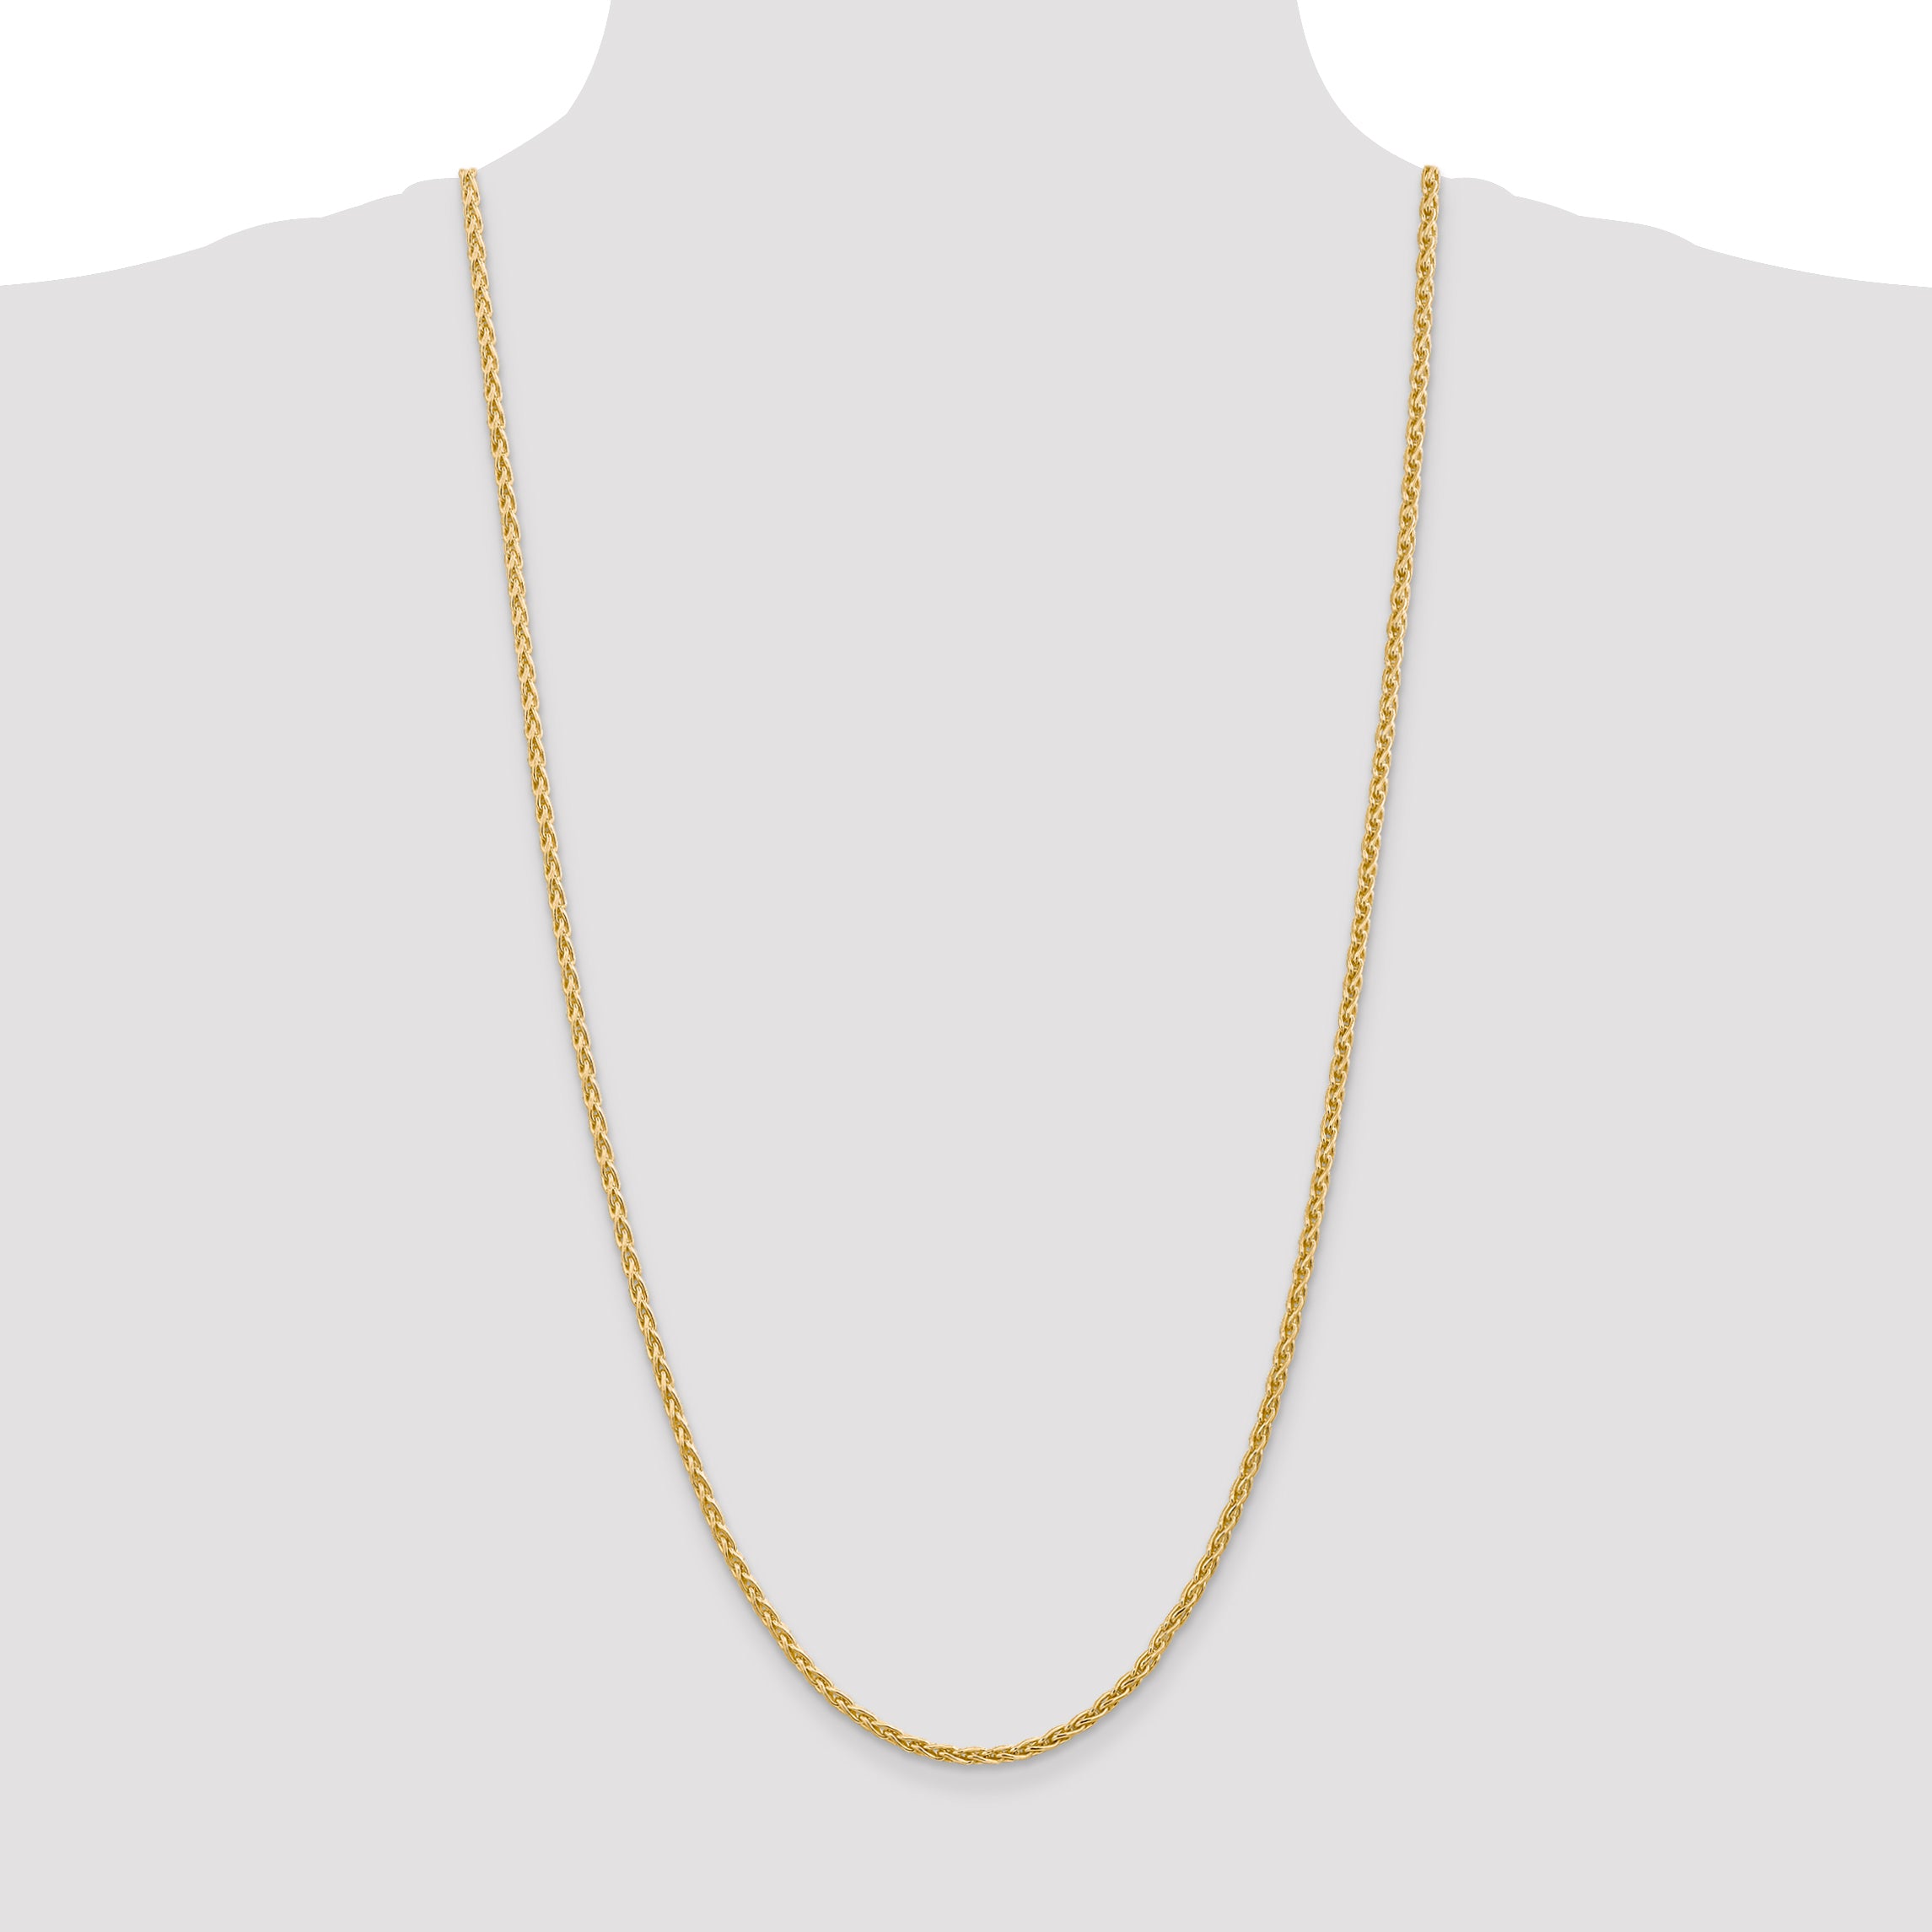 14k 16 inch 3mm Parisian Wheat with Lobster Clasp Chain